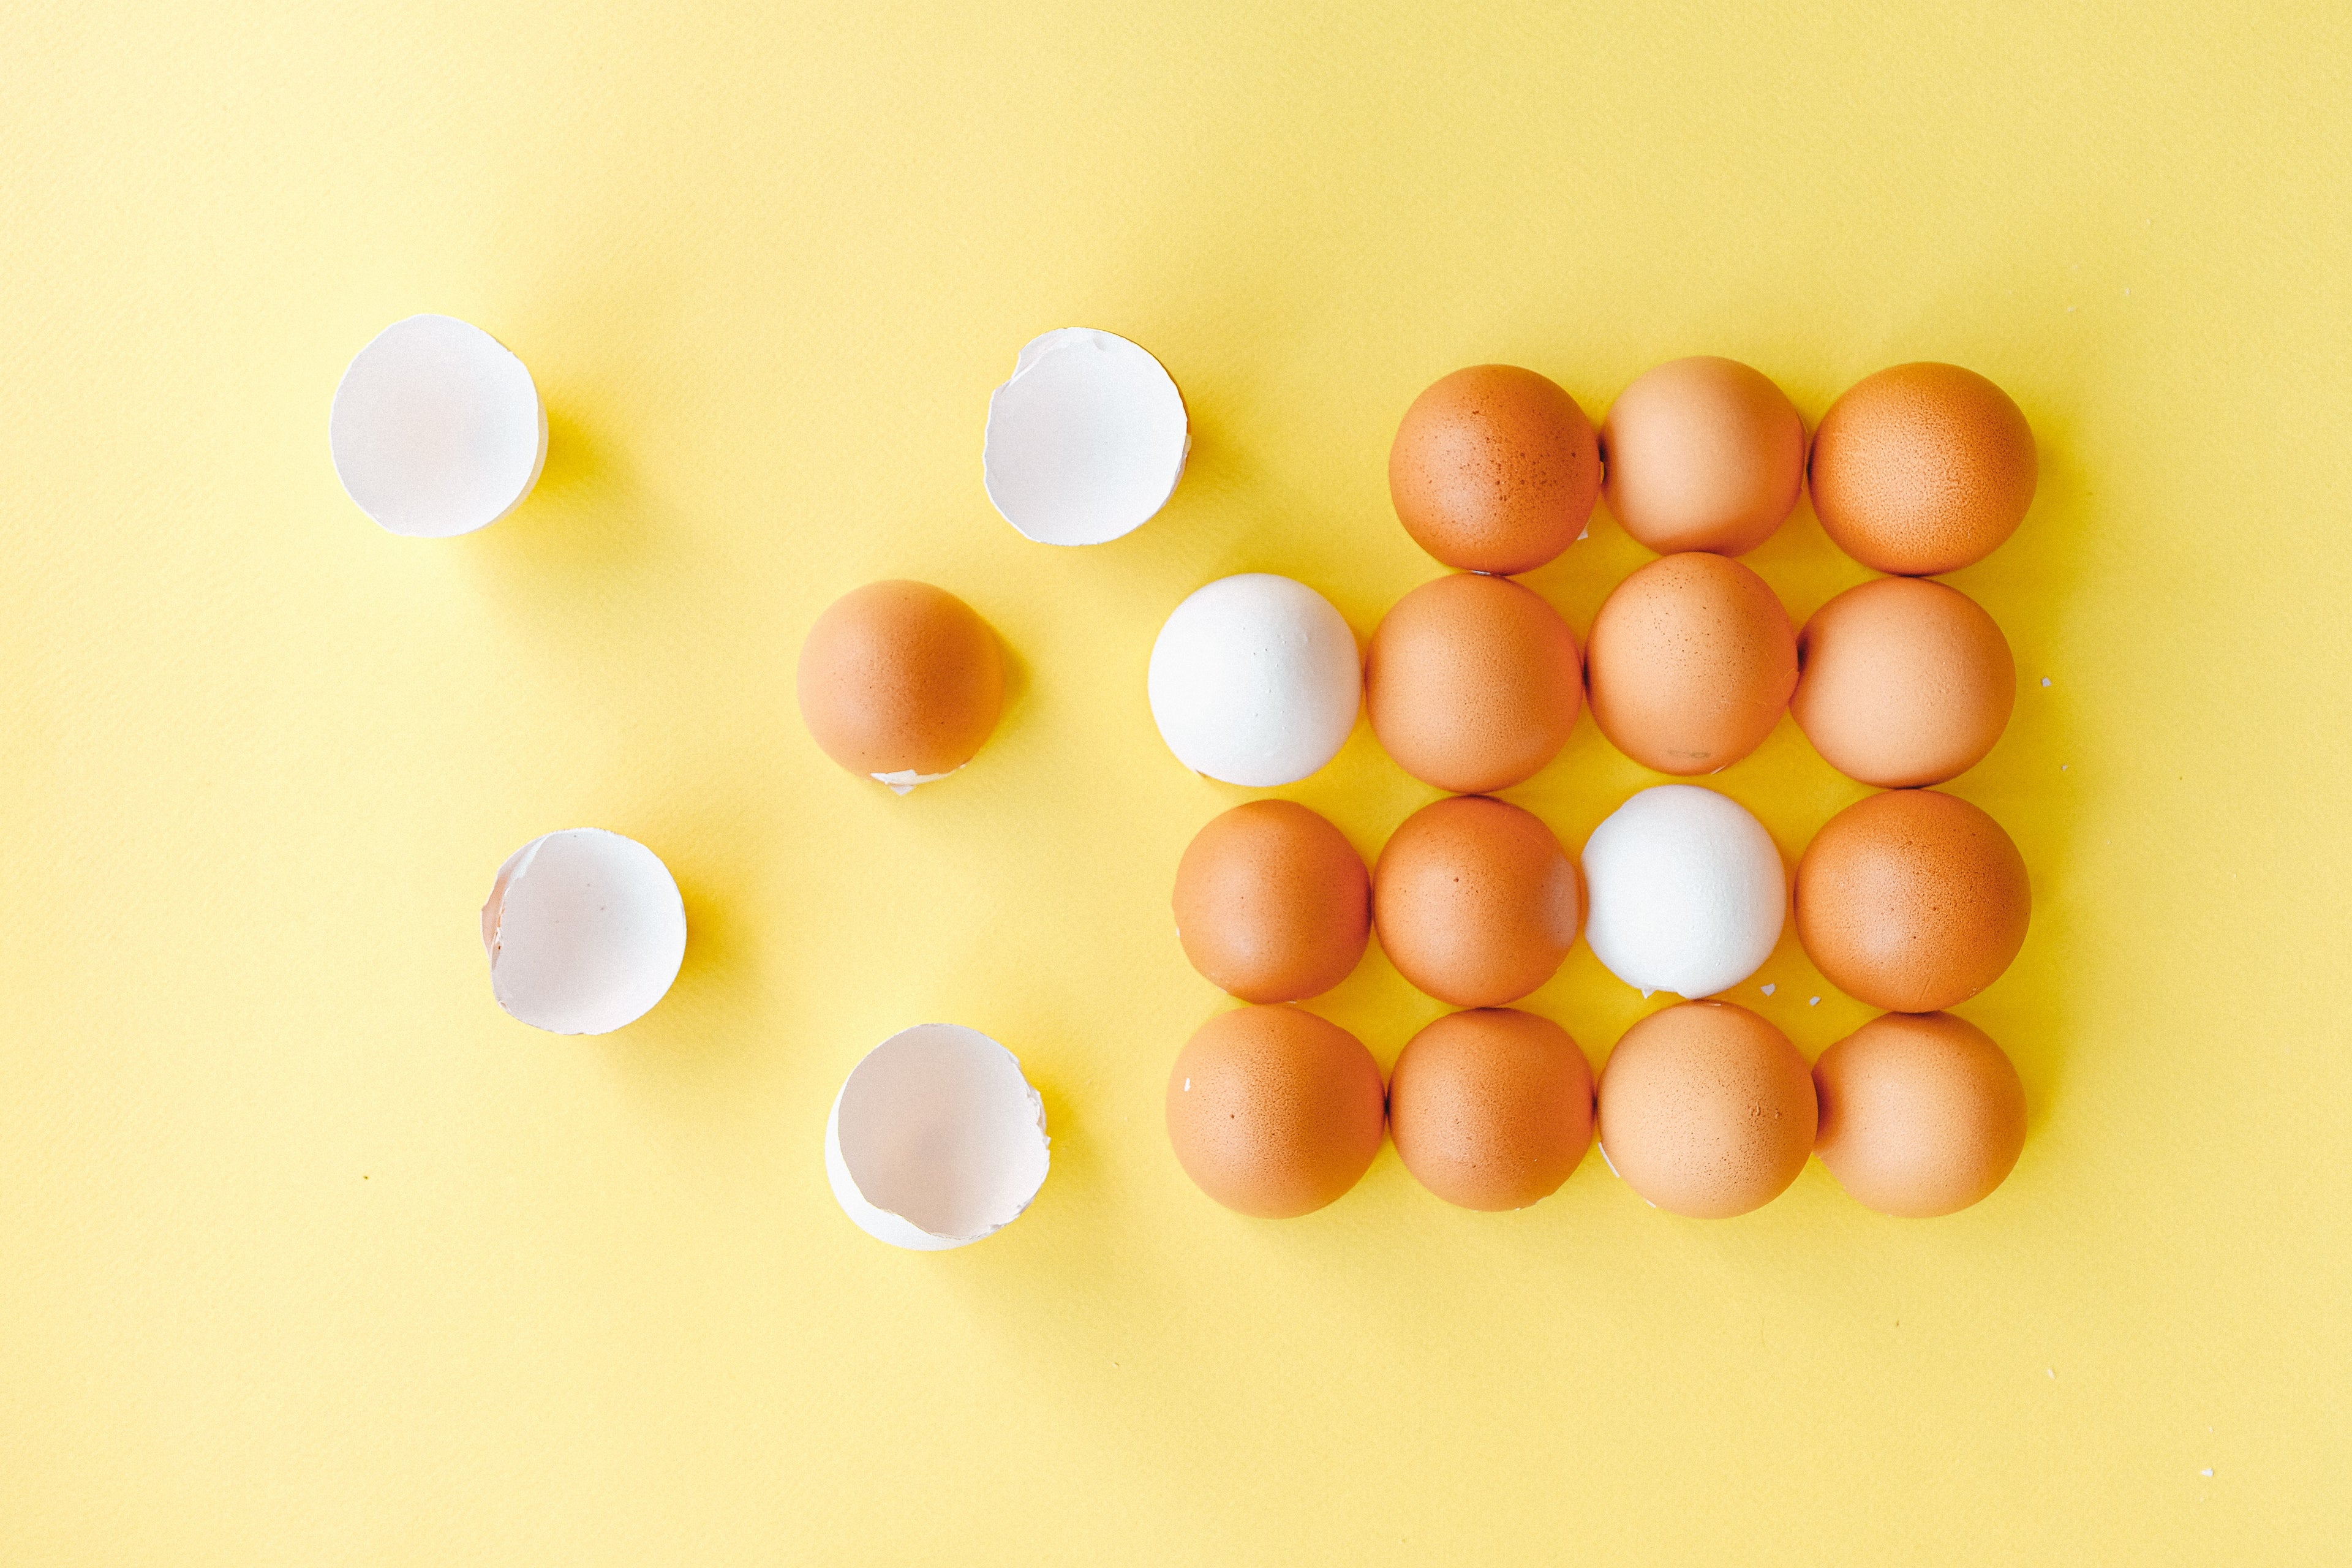 Egg and eggshells on a yellow background